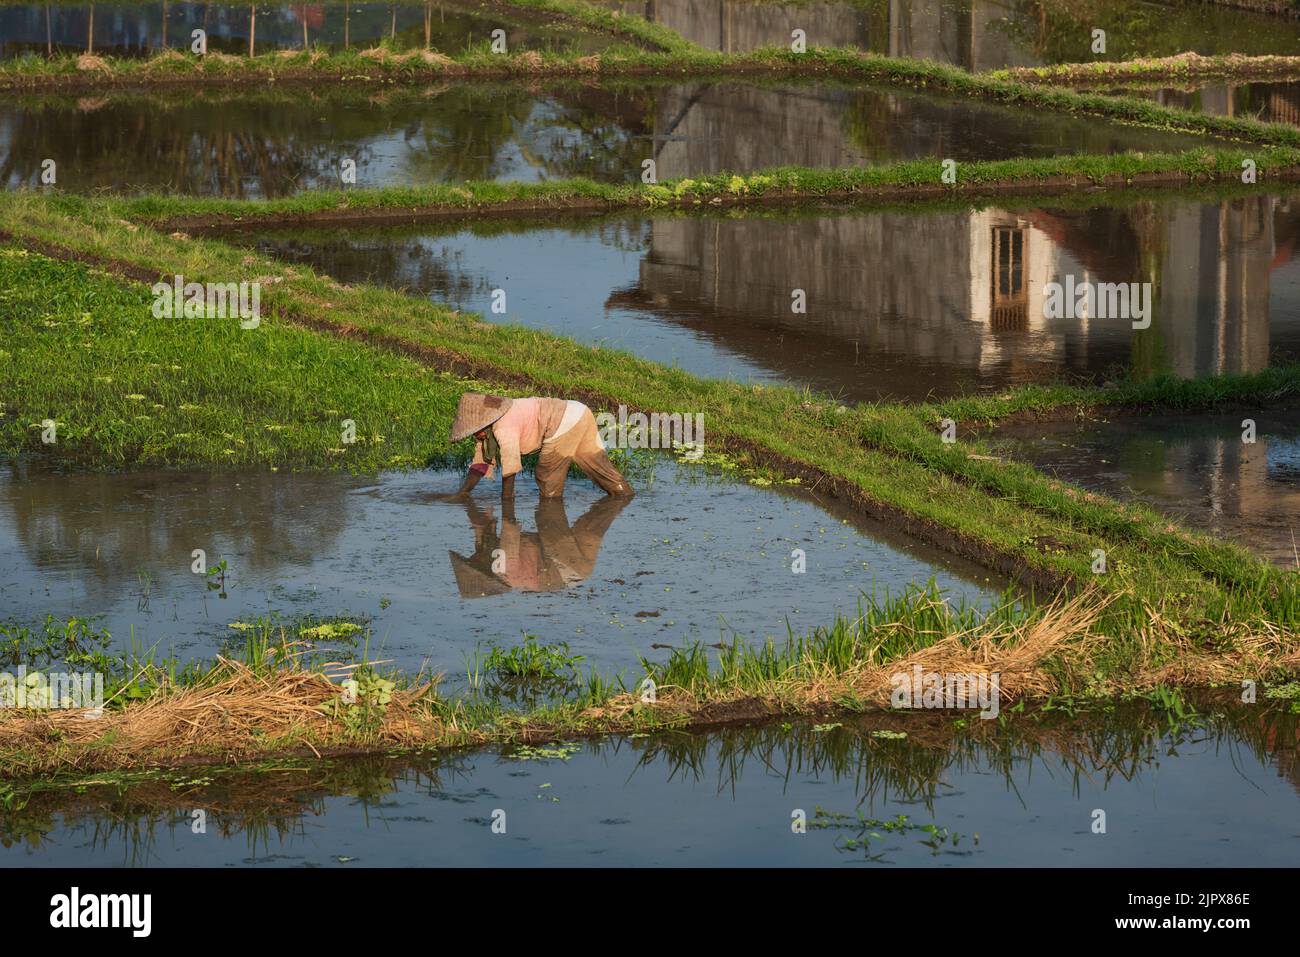 The landscape of the rice fields. Rice farmers working in the rice fields in the center of Ubud. The island Bali in indonesia in southeast asia. Stock Photo